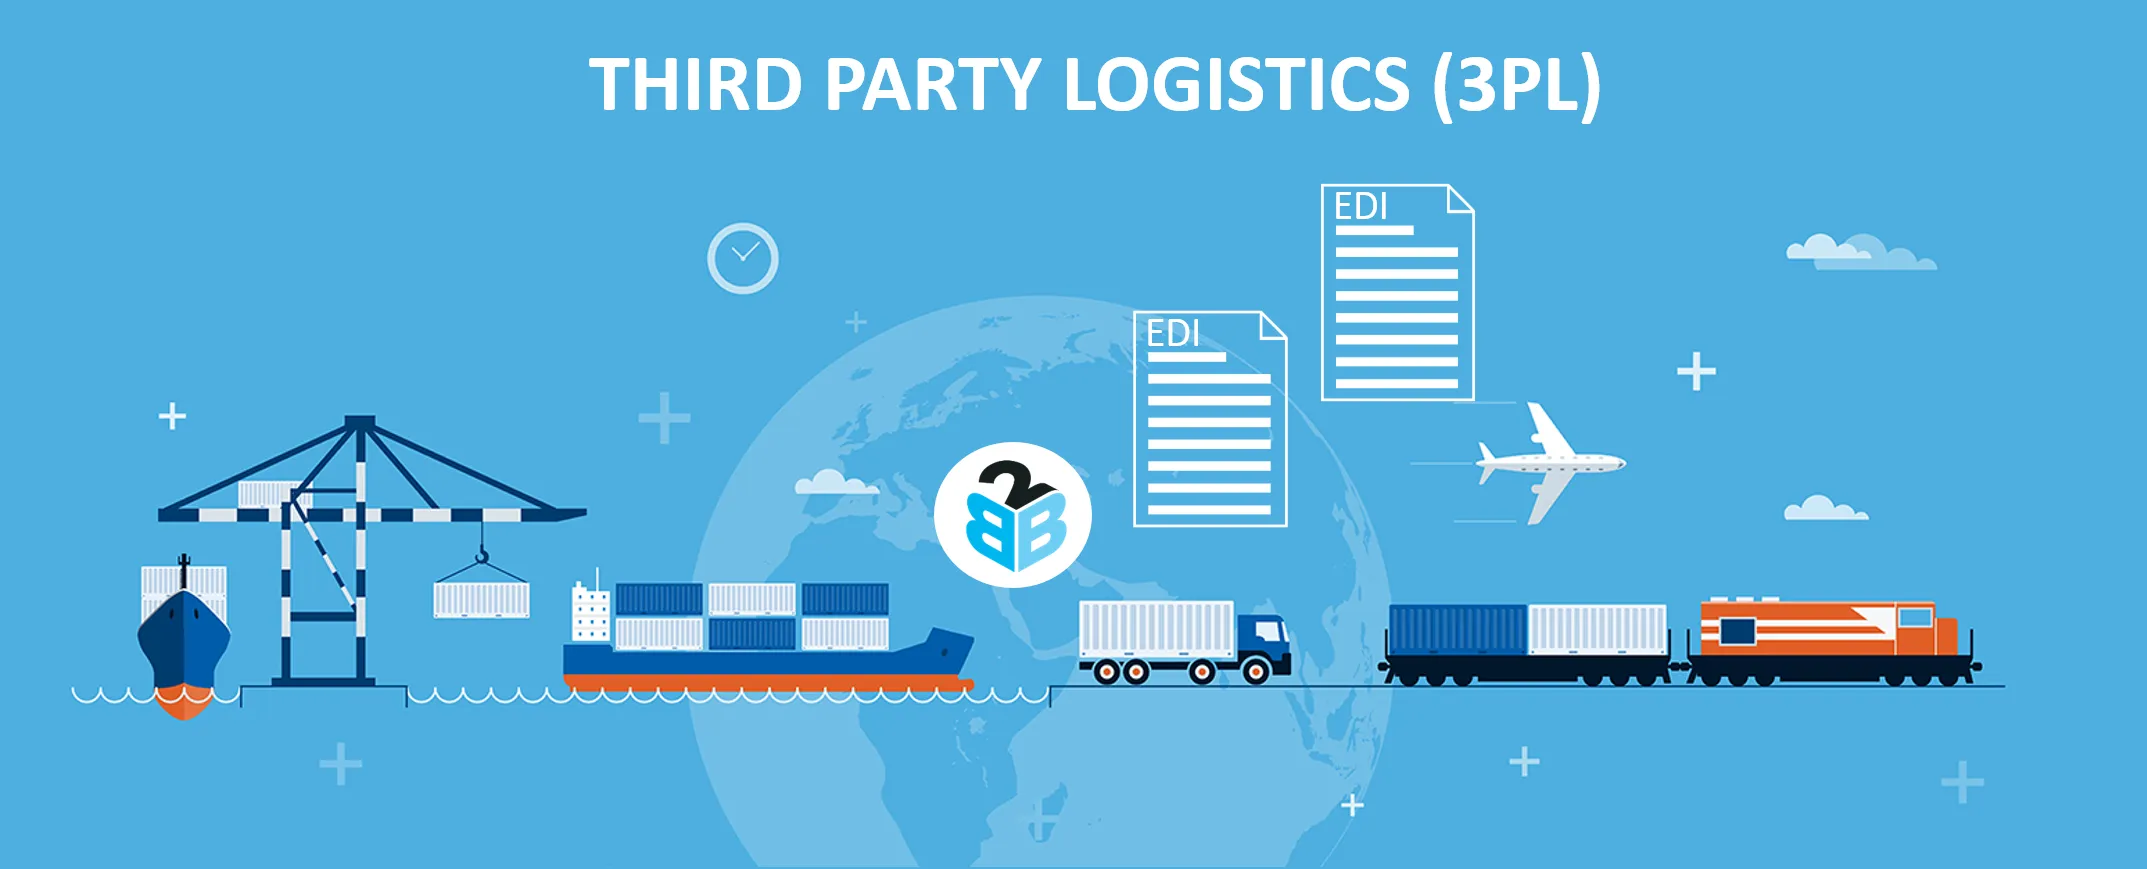 Use of Third-Party Logistics Providers (3PLs)